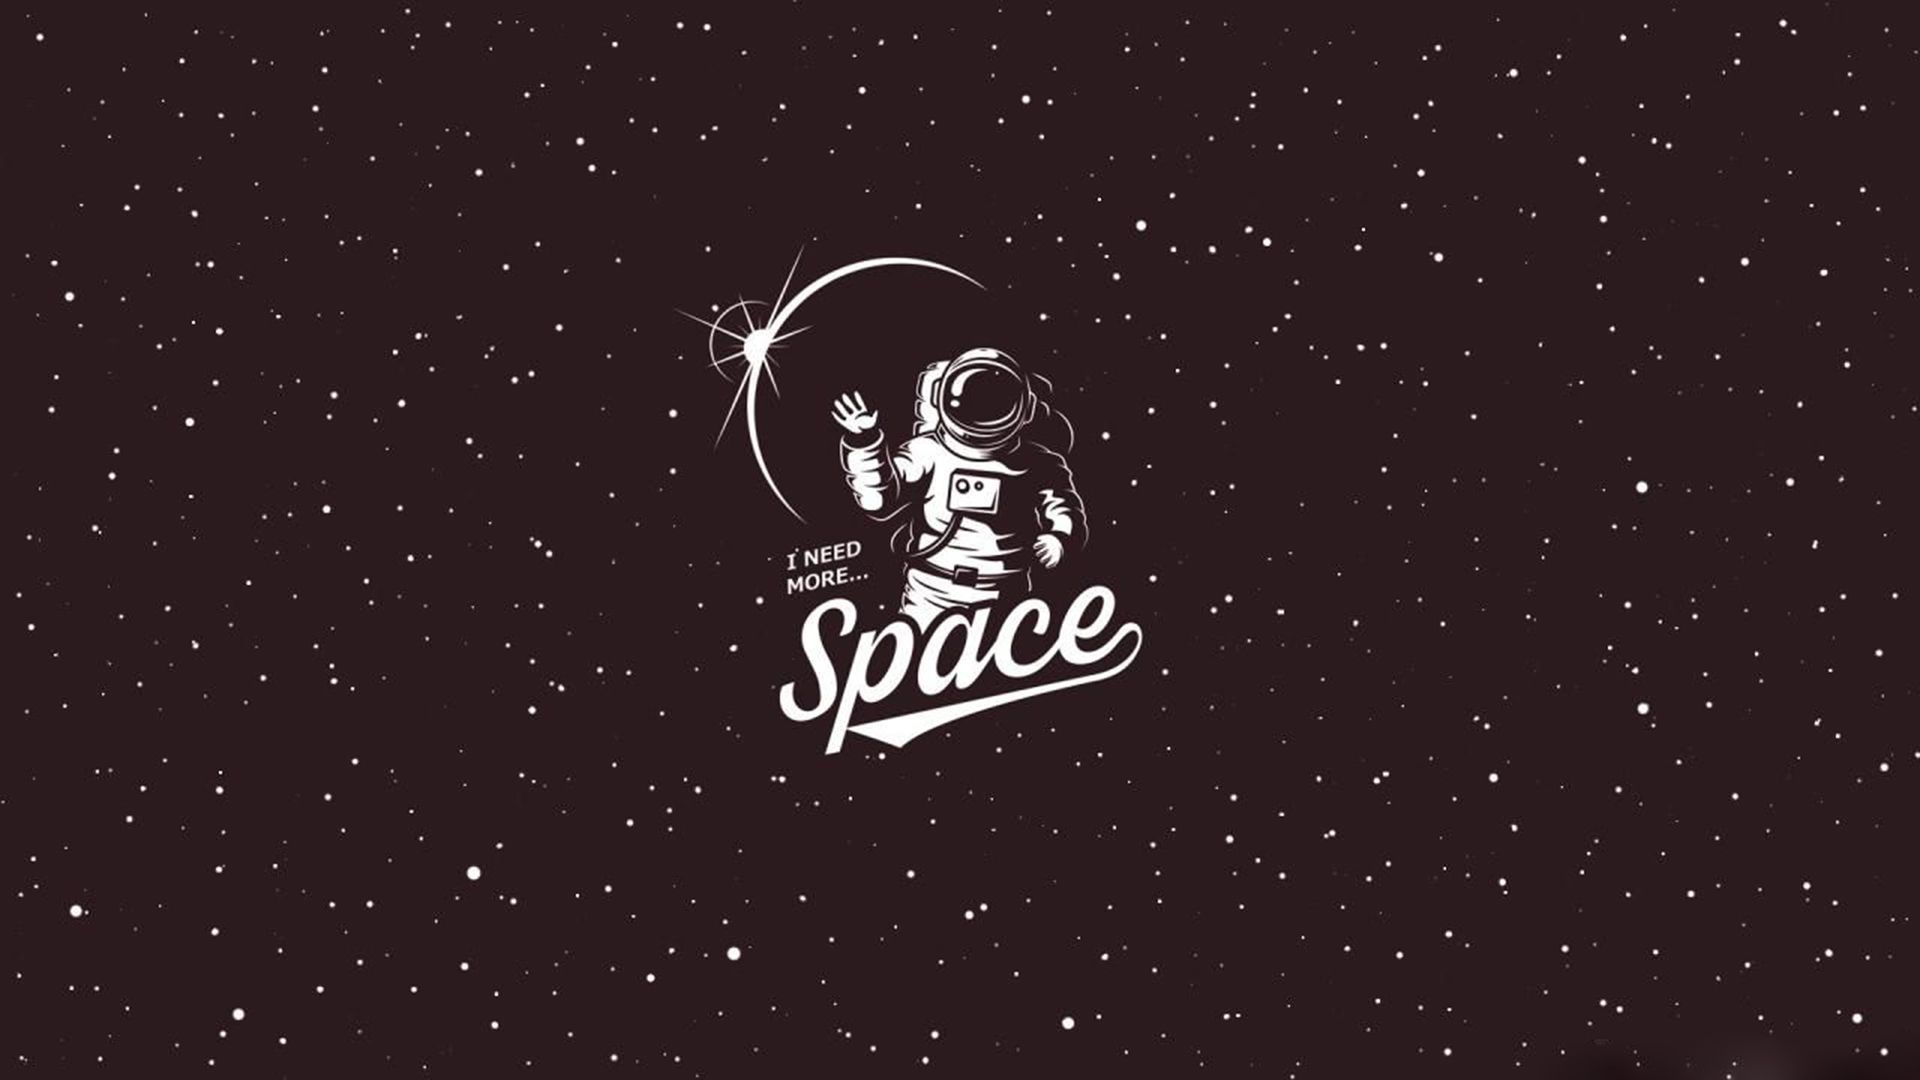 Astronaut in space waving at a star. - Stars, computer, space